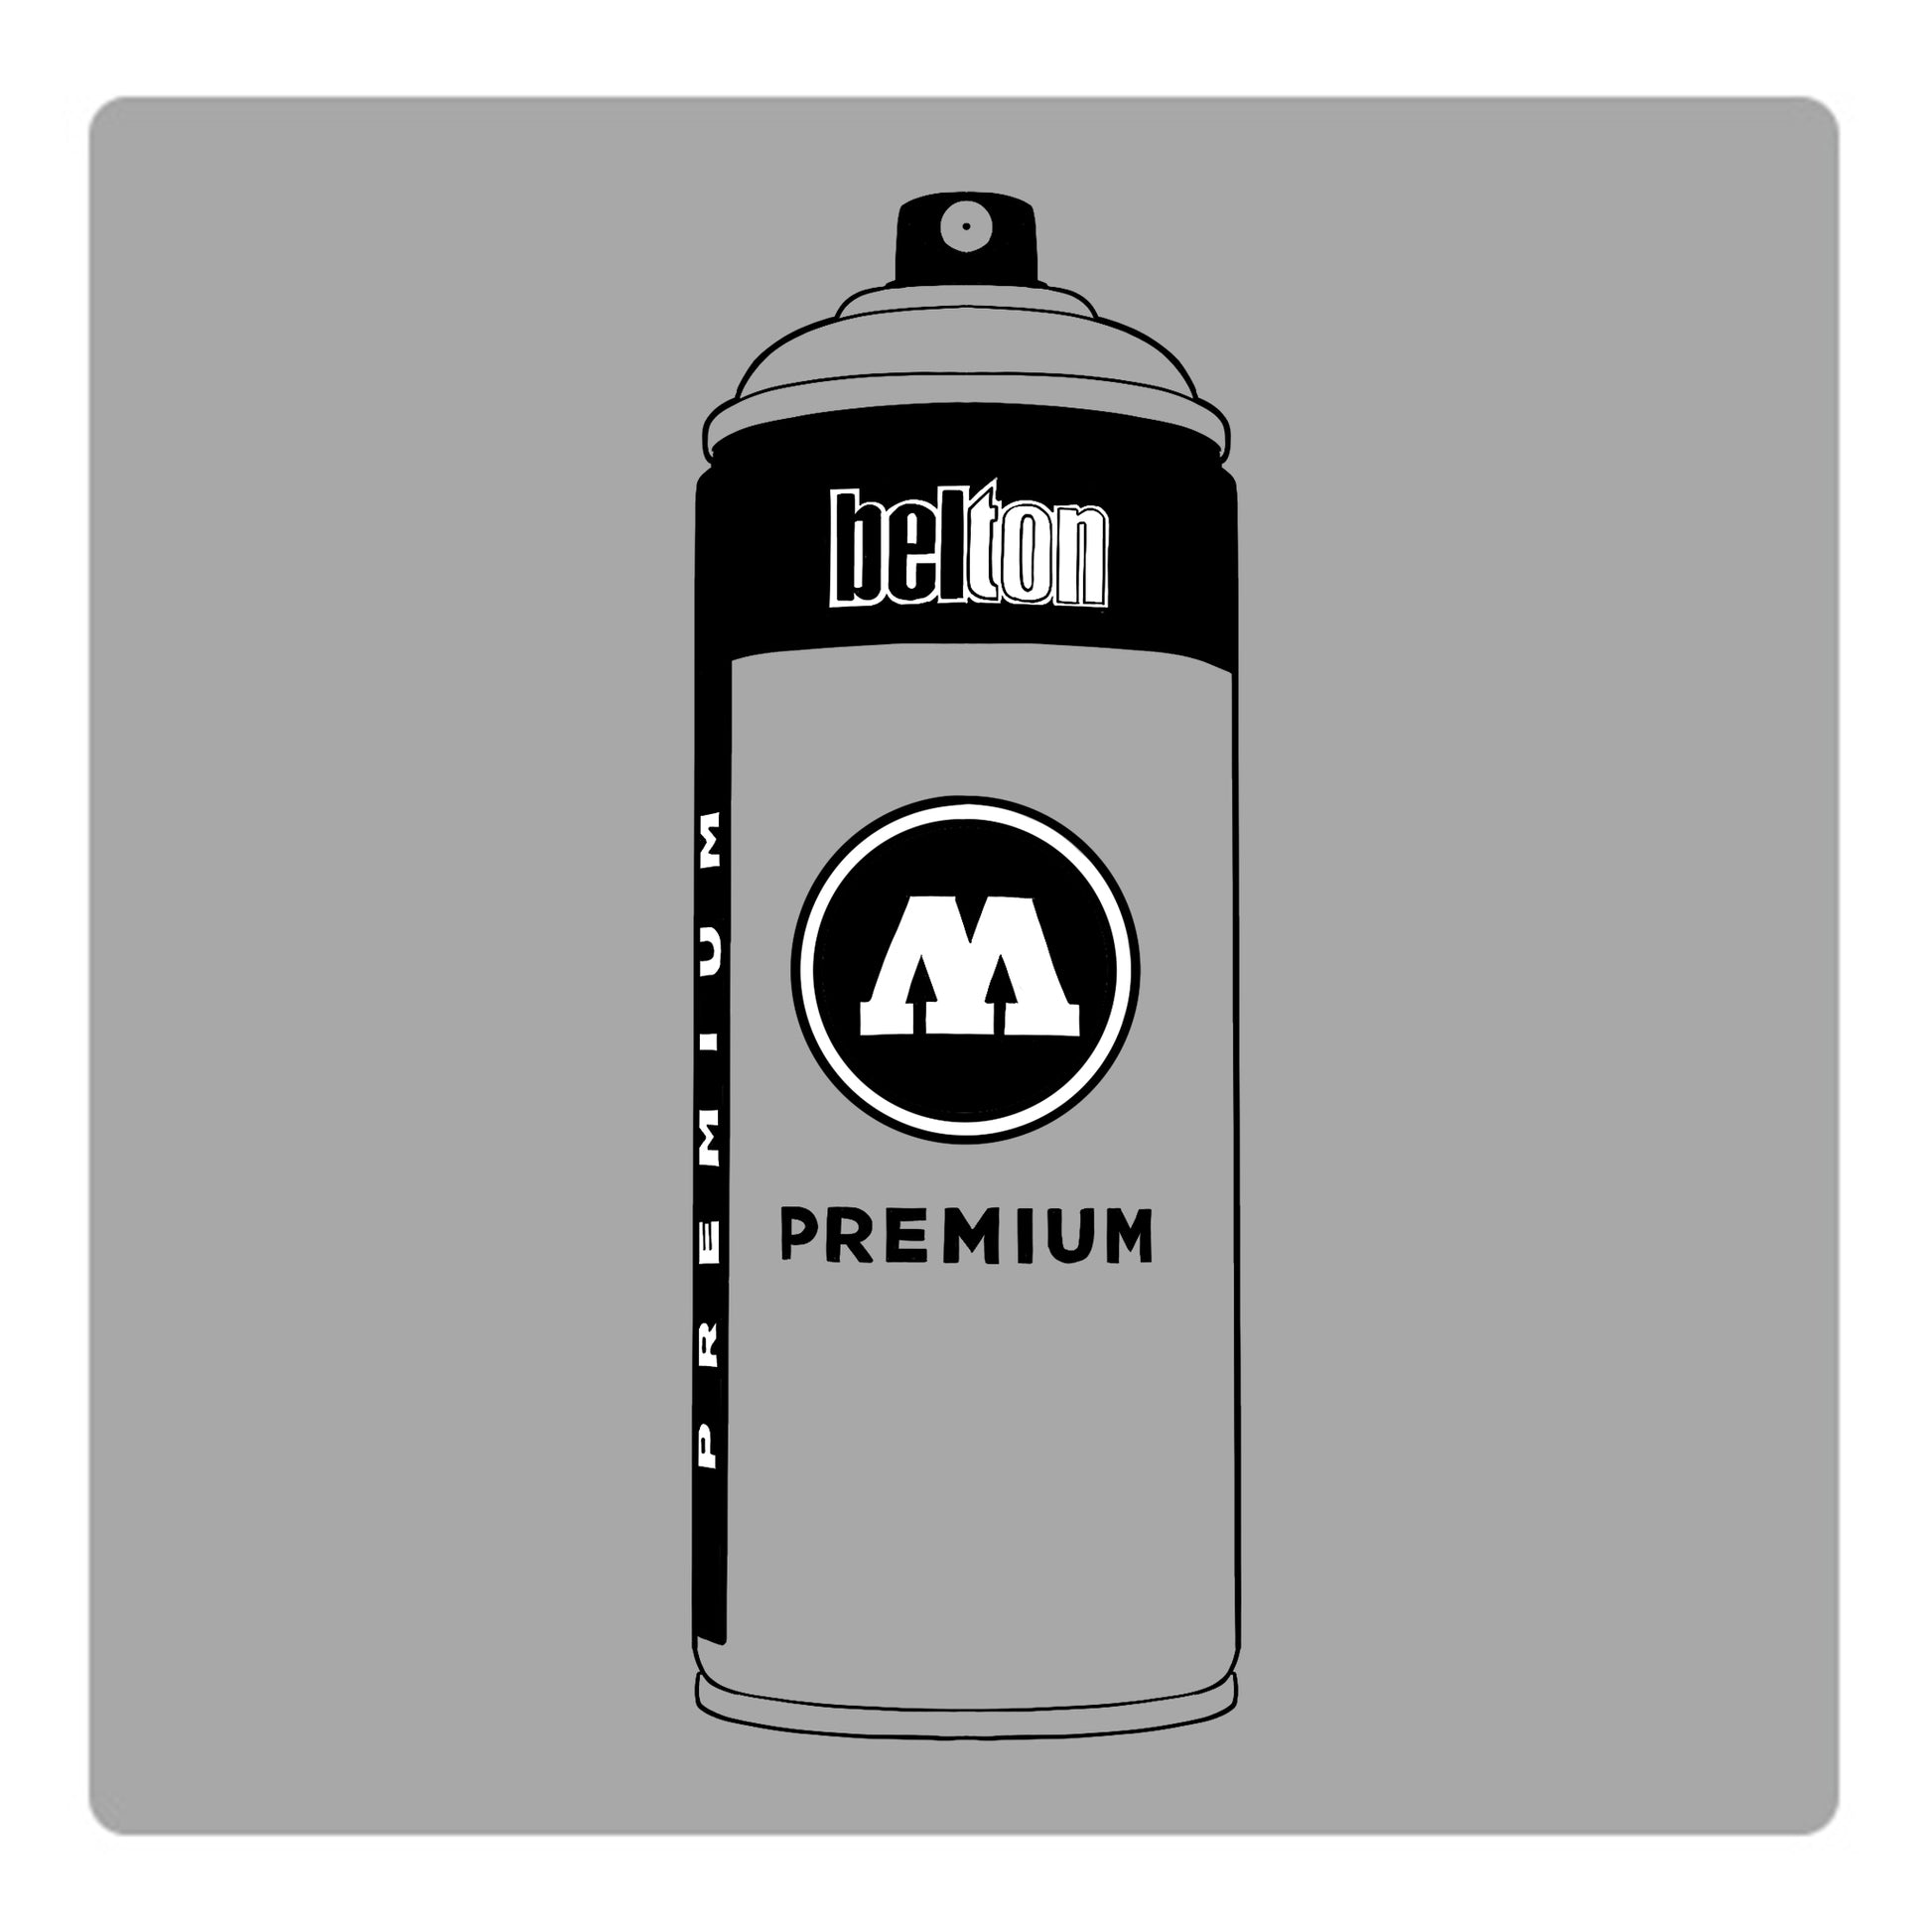 A black outline drawing of a pale grey spray paint can with the words "belton","premium" and the letter"M" written on the face in black and white font. The background is a color swatch of the same pale grey with a white border